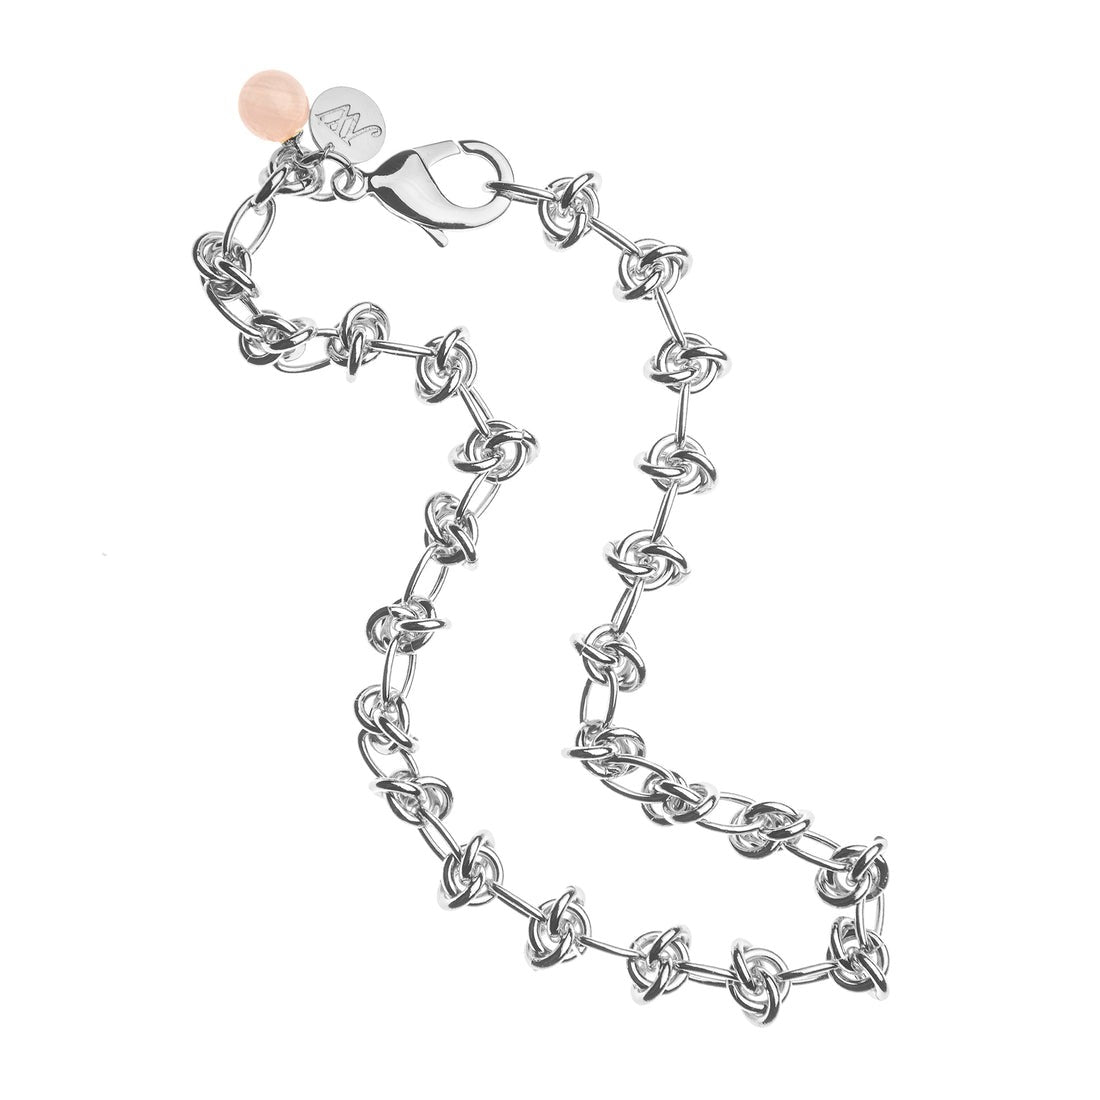 Jane Win In a Knot Chain with Rose Quartz Bead